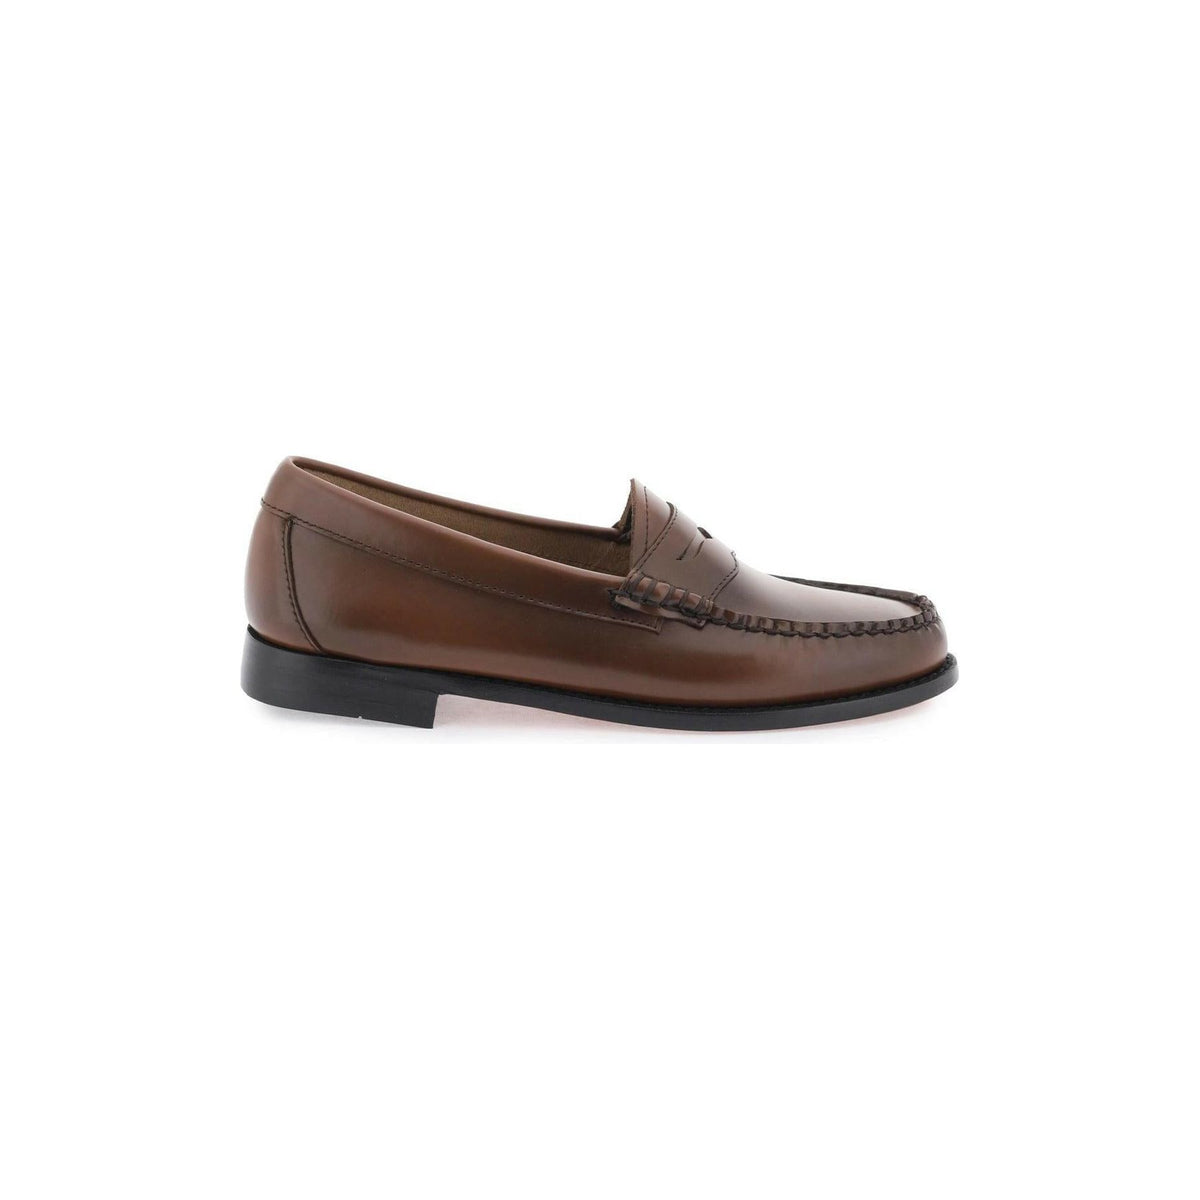 G.H. BASS - Cognac Handcrafted Leather Weejuns Penny Loafers - JOHN JULIA